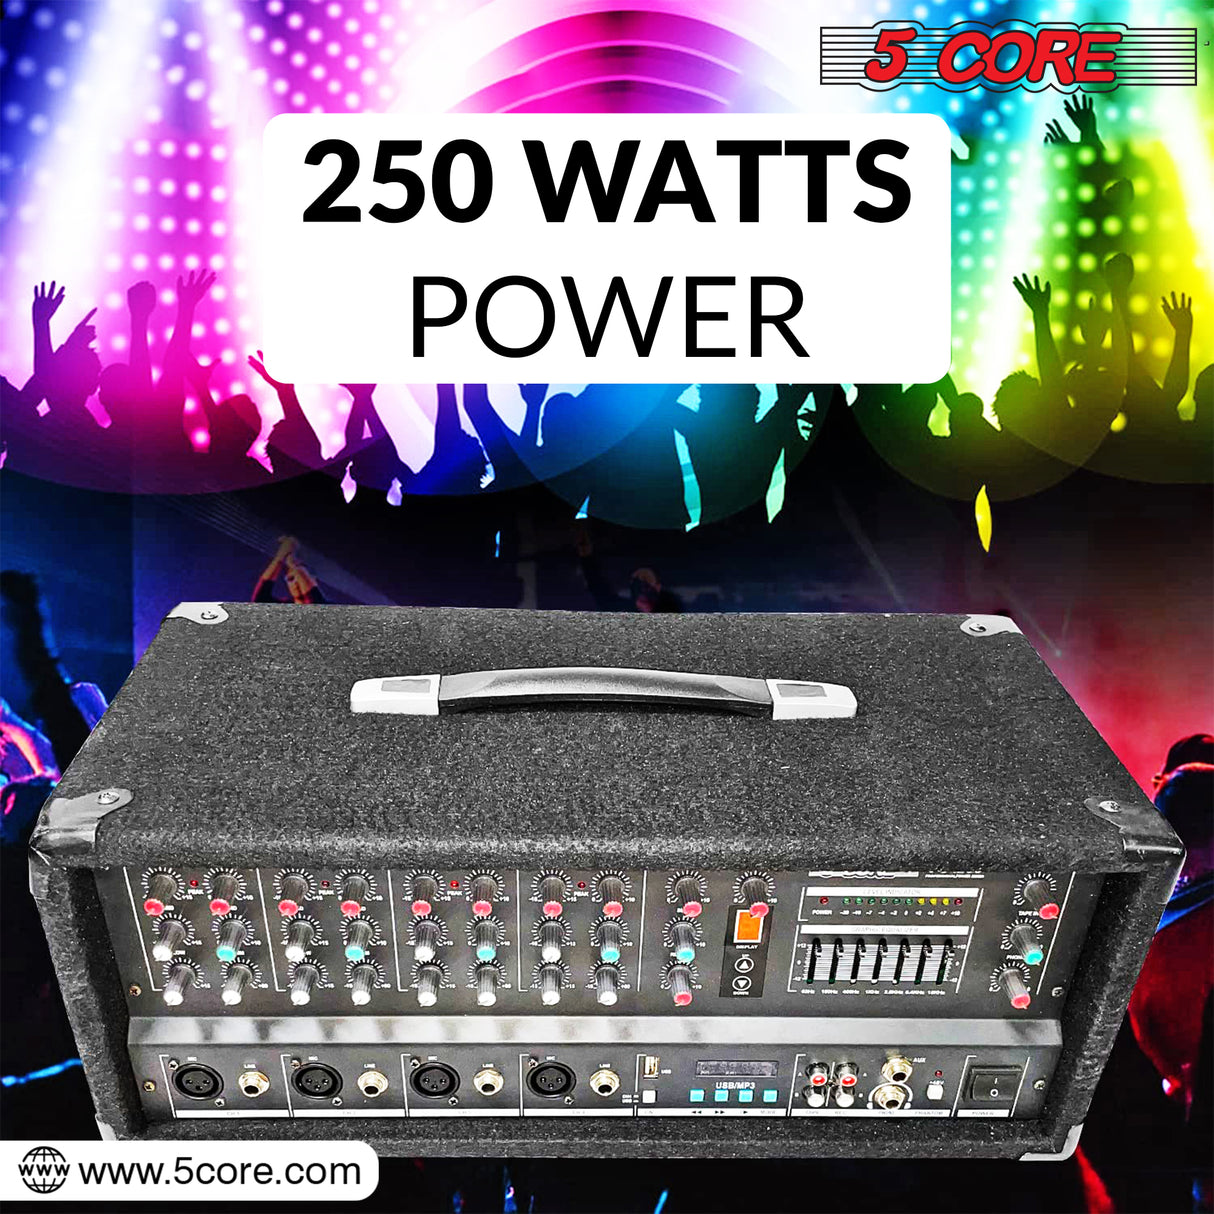 5 Core 4 Channel Powered DJ Mixer Peak Power 600W With Travel Case Microphone Input, AUX, USB, TF card & Headphone Jack for Stereo Mixing Effects Hard Shell Protection Power Indian Made Audio MIXER 4200